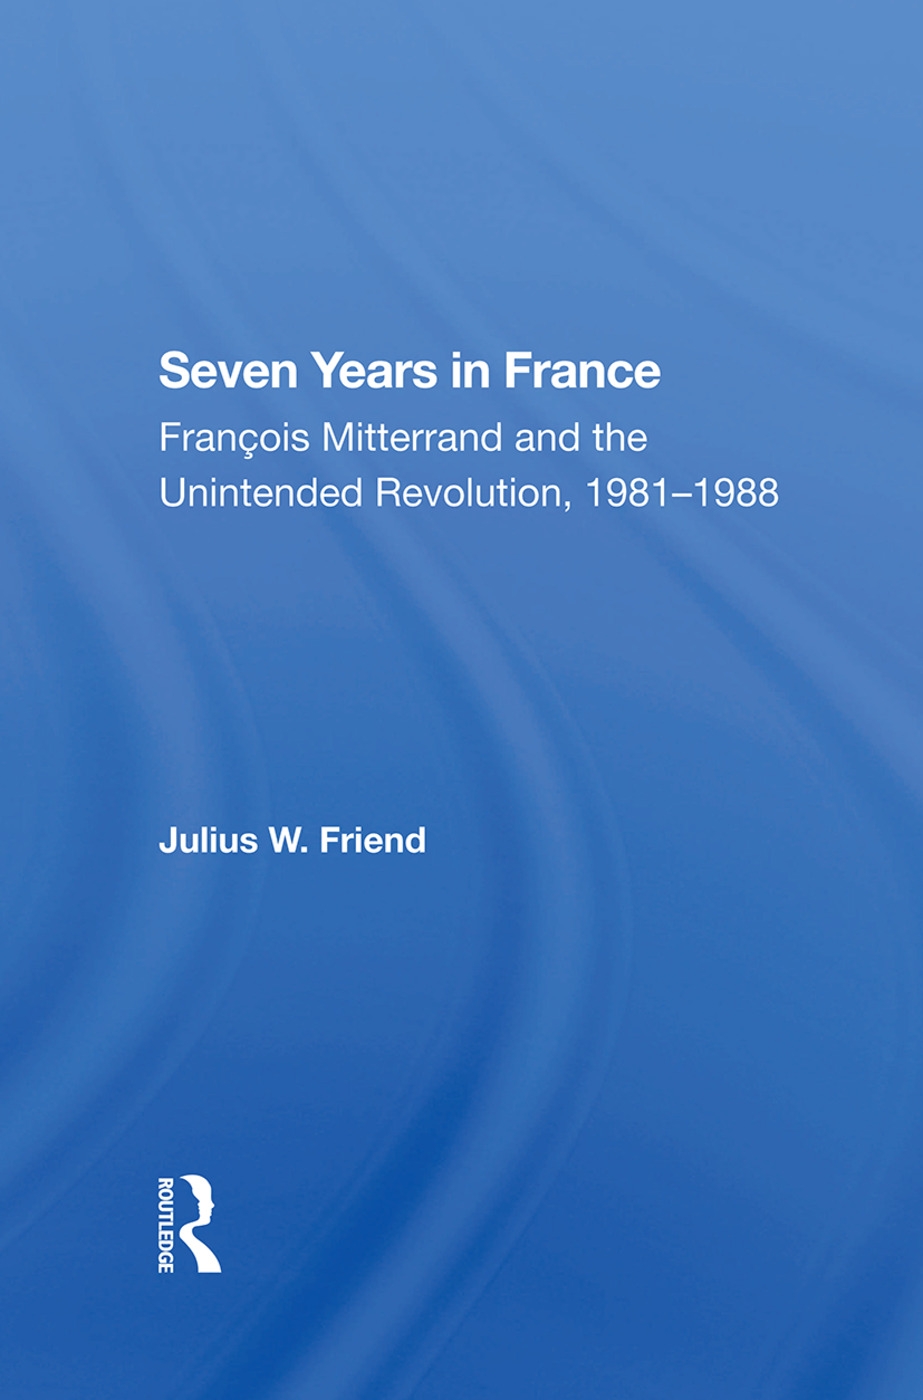 Seven Years in France: François Mitterrand and the Unintended Revolution, 1981-1988